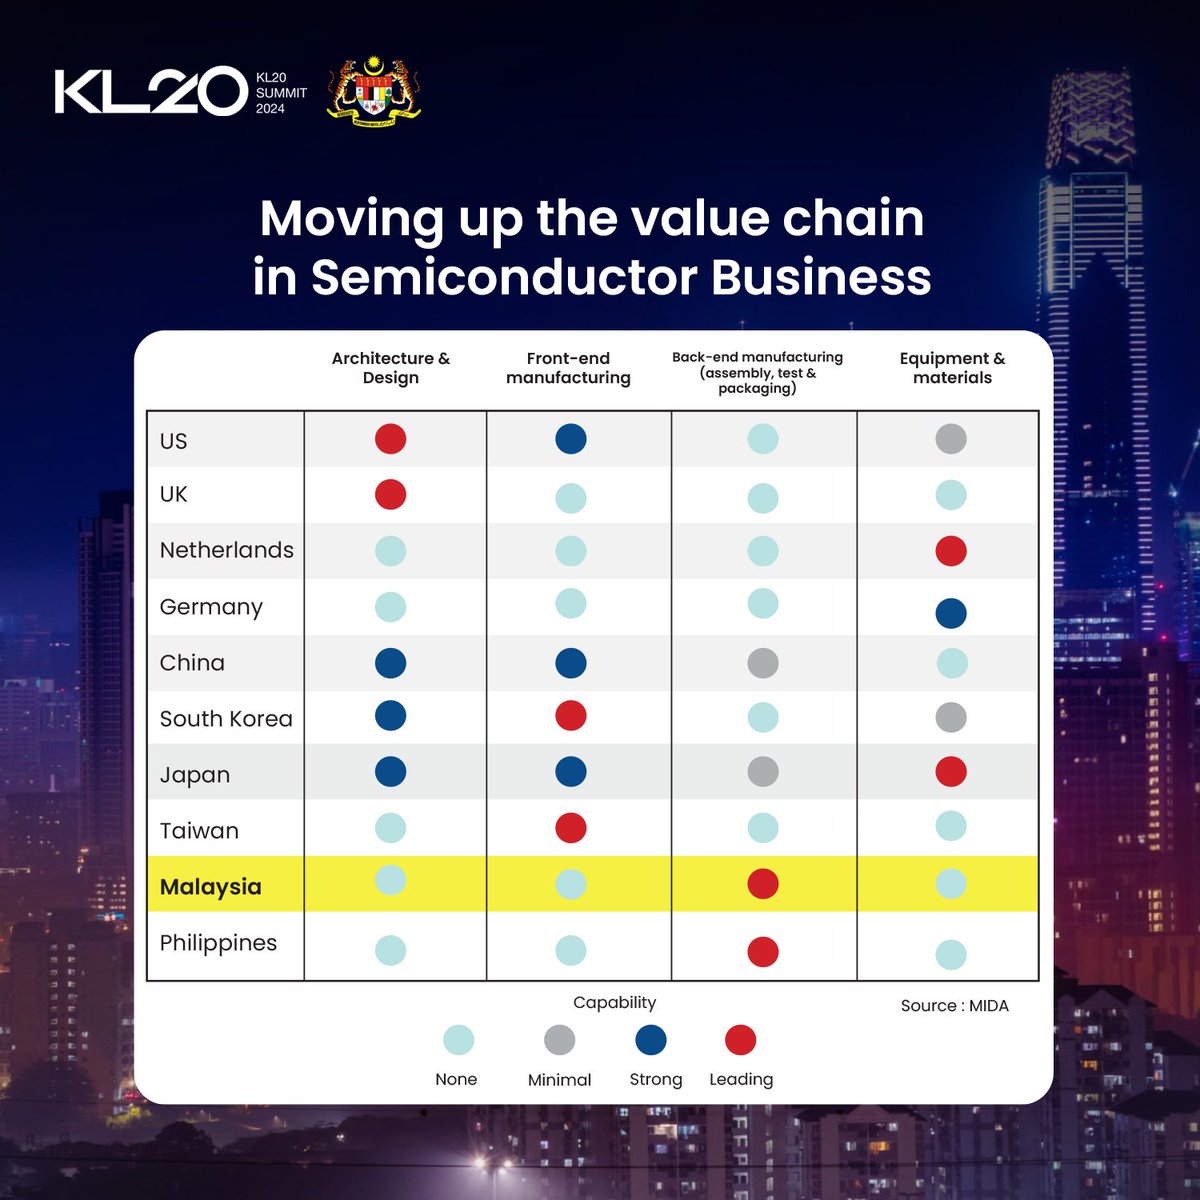 In Malaysia's vibrant Electronics and Electrical (E&E) industry, we've established a strong foothold in essential back-end activities such as assembly and testing. Yet, as we gaze towards the frontier of design, fabrication, and higher-value components, the need for advancement